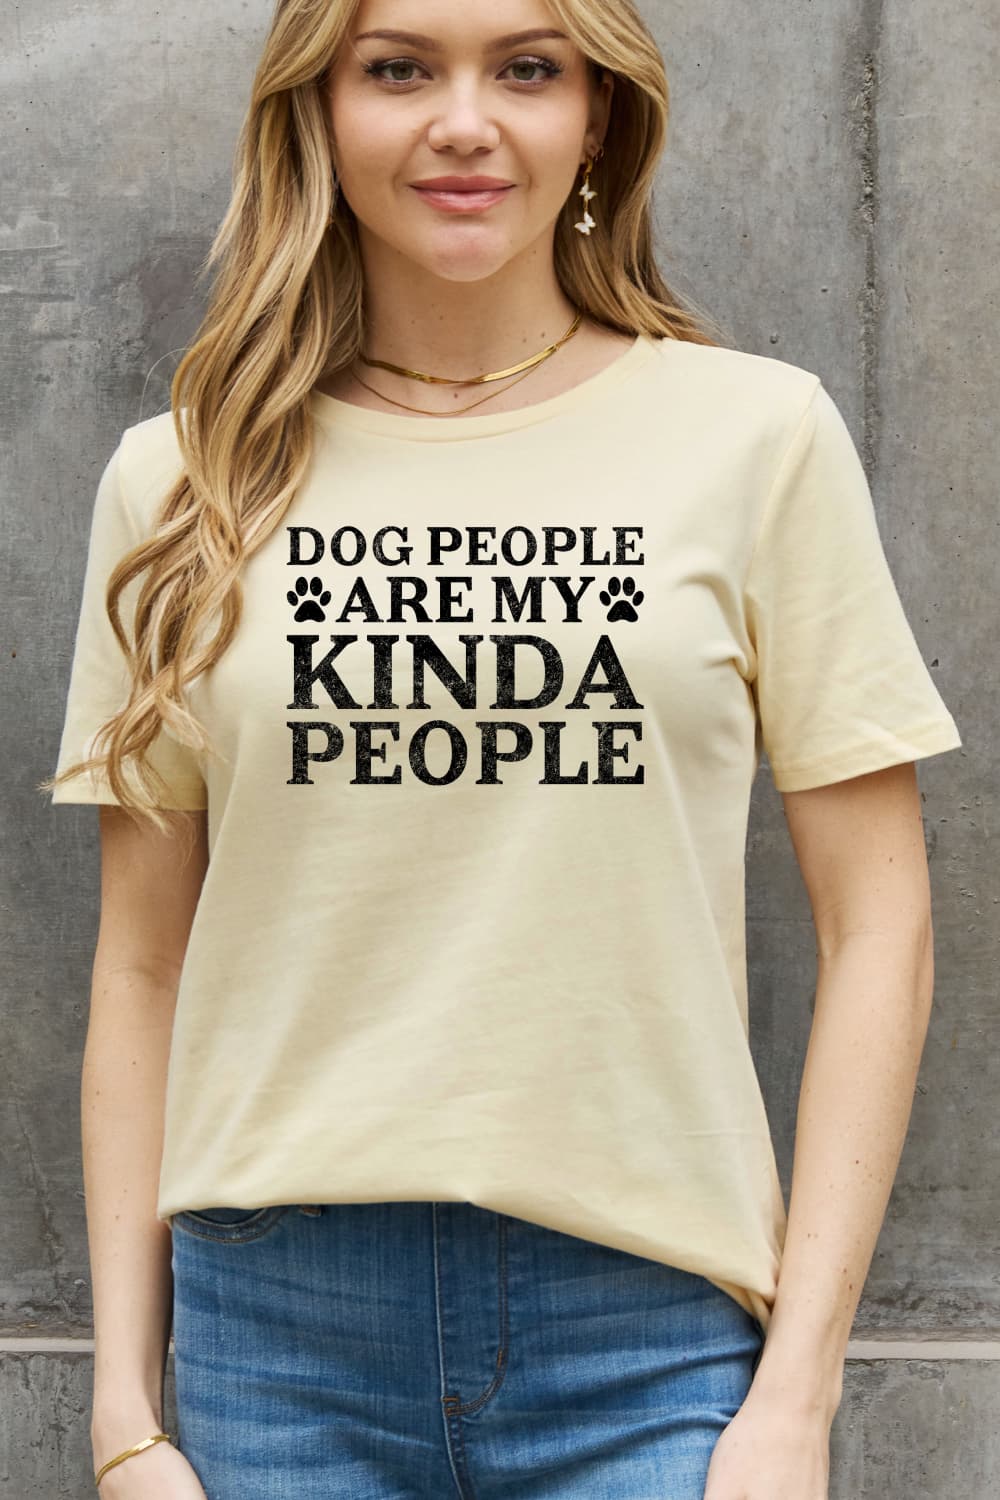 Full Size DOG PEOPLE ARE MY KINDA PEOPLE Graphic Cotton Tee